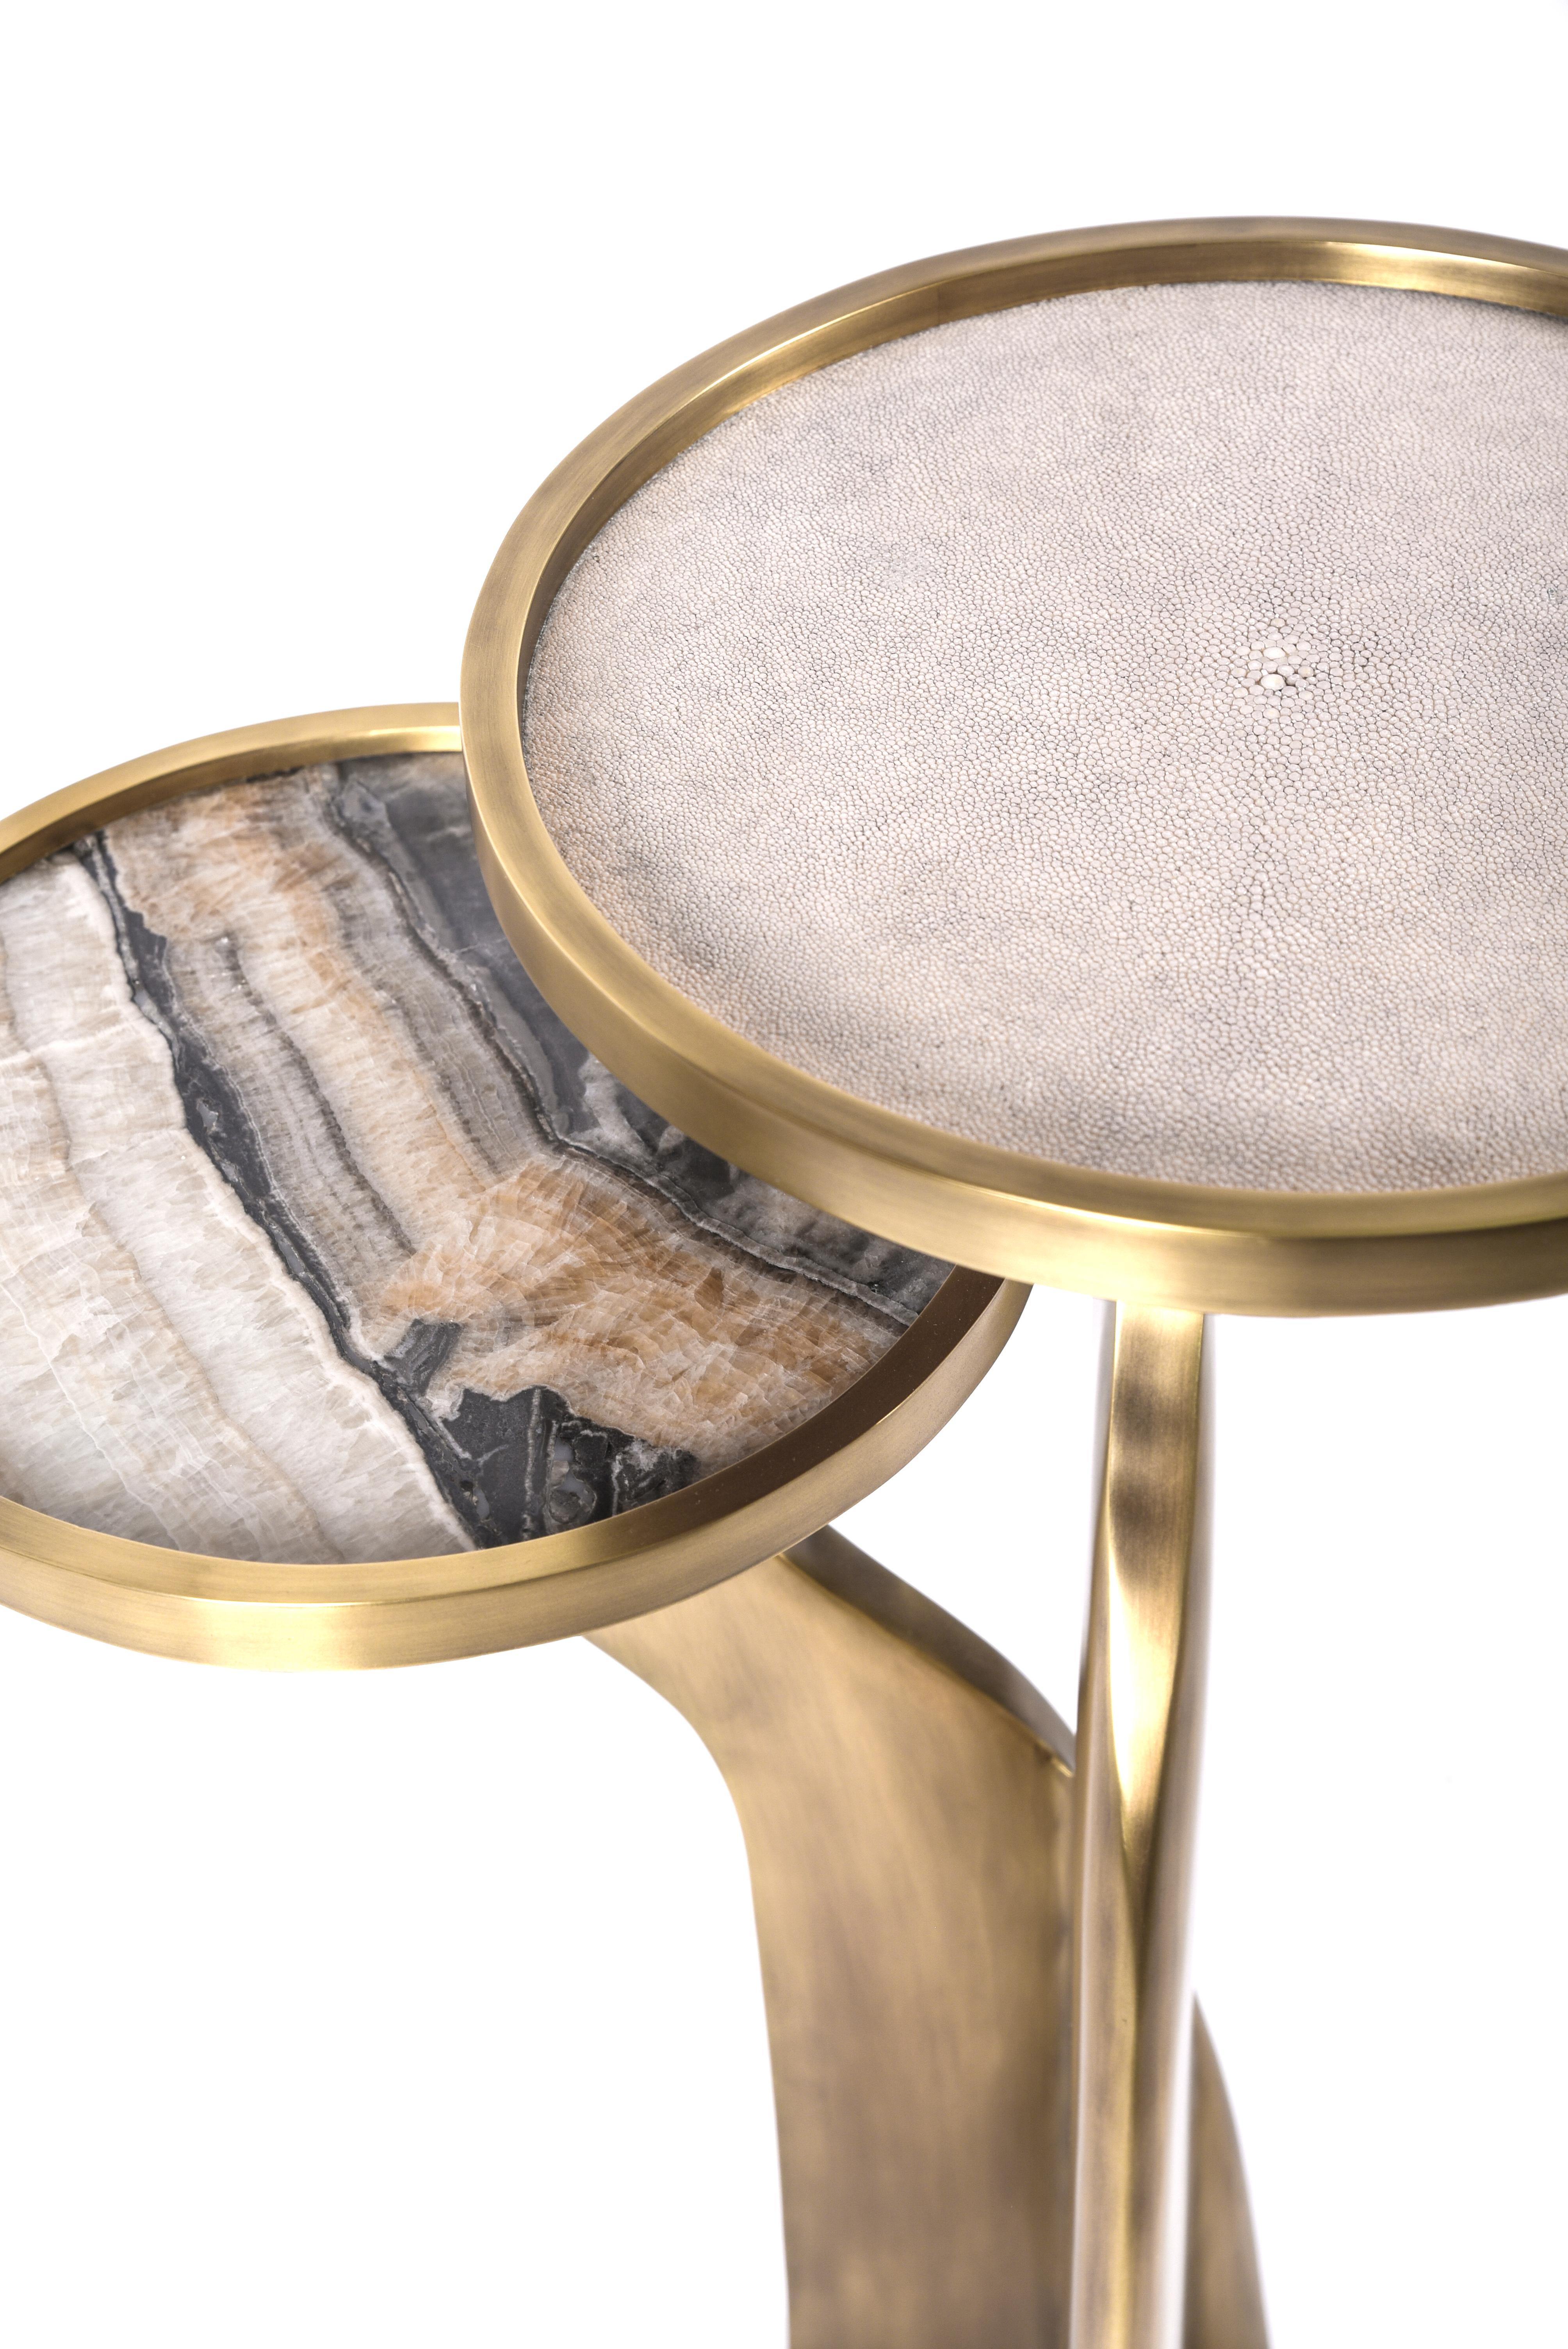 The Chital 2-top side table is both dramatic and organic it’s unique design. The 2-top mixture of cream shagreen and onyx, sits on a pair of ethereal and sculptural legs that are fully inlaid in bronze-patina brass. This piece makes for the perfect